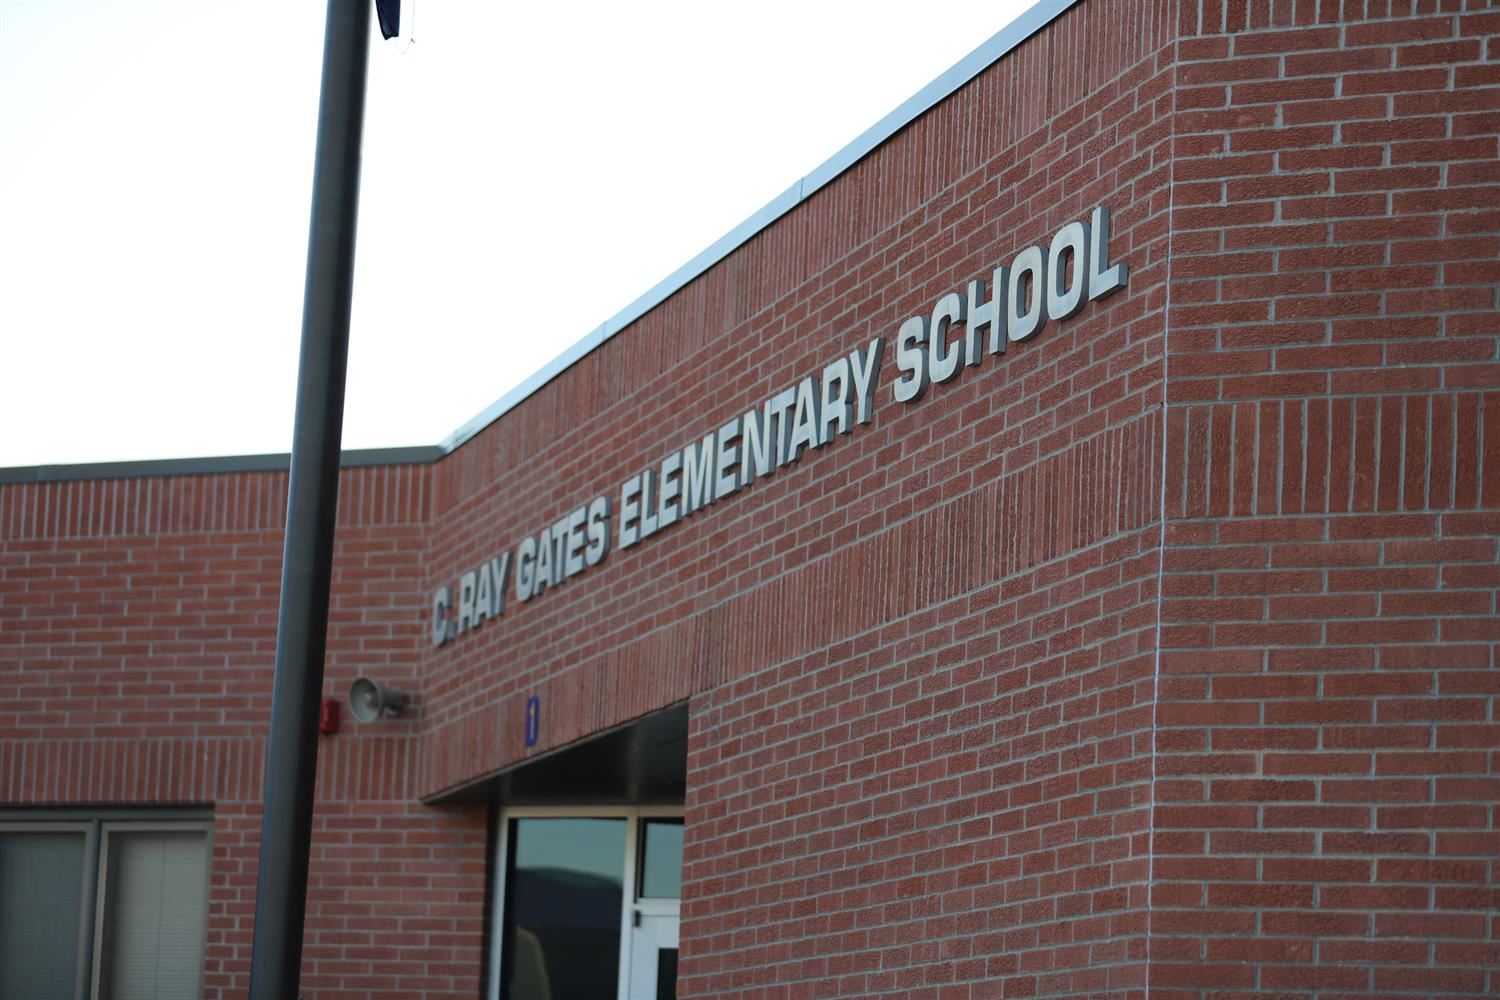 Photo of the front facade of Gates Elementary School